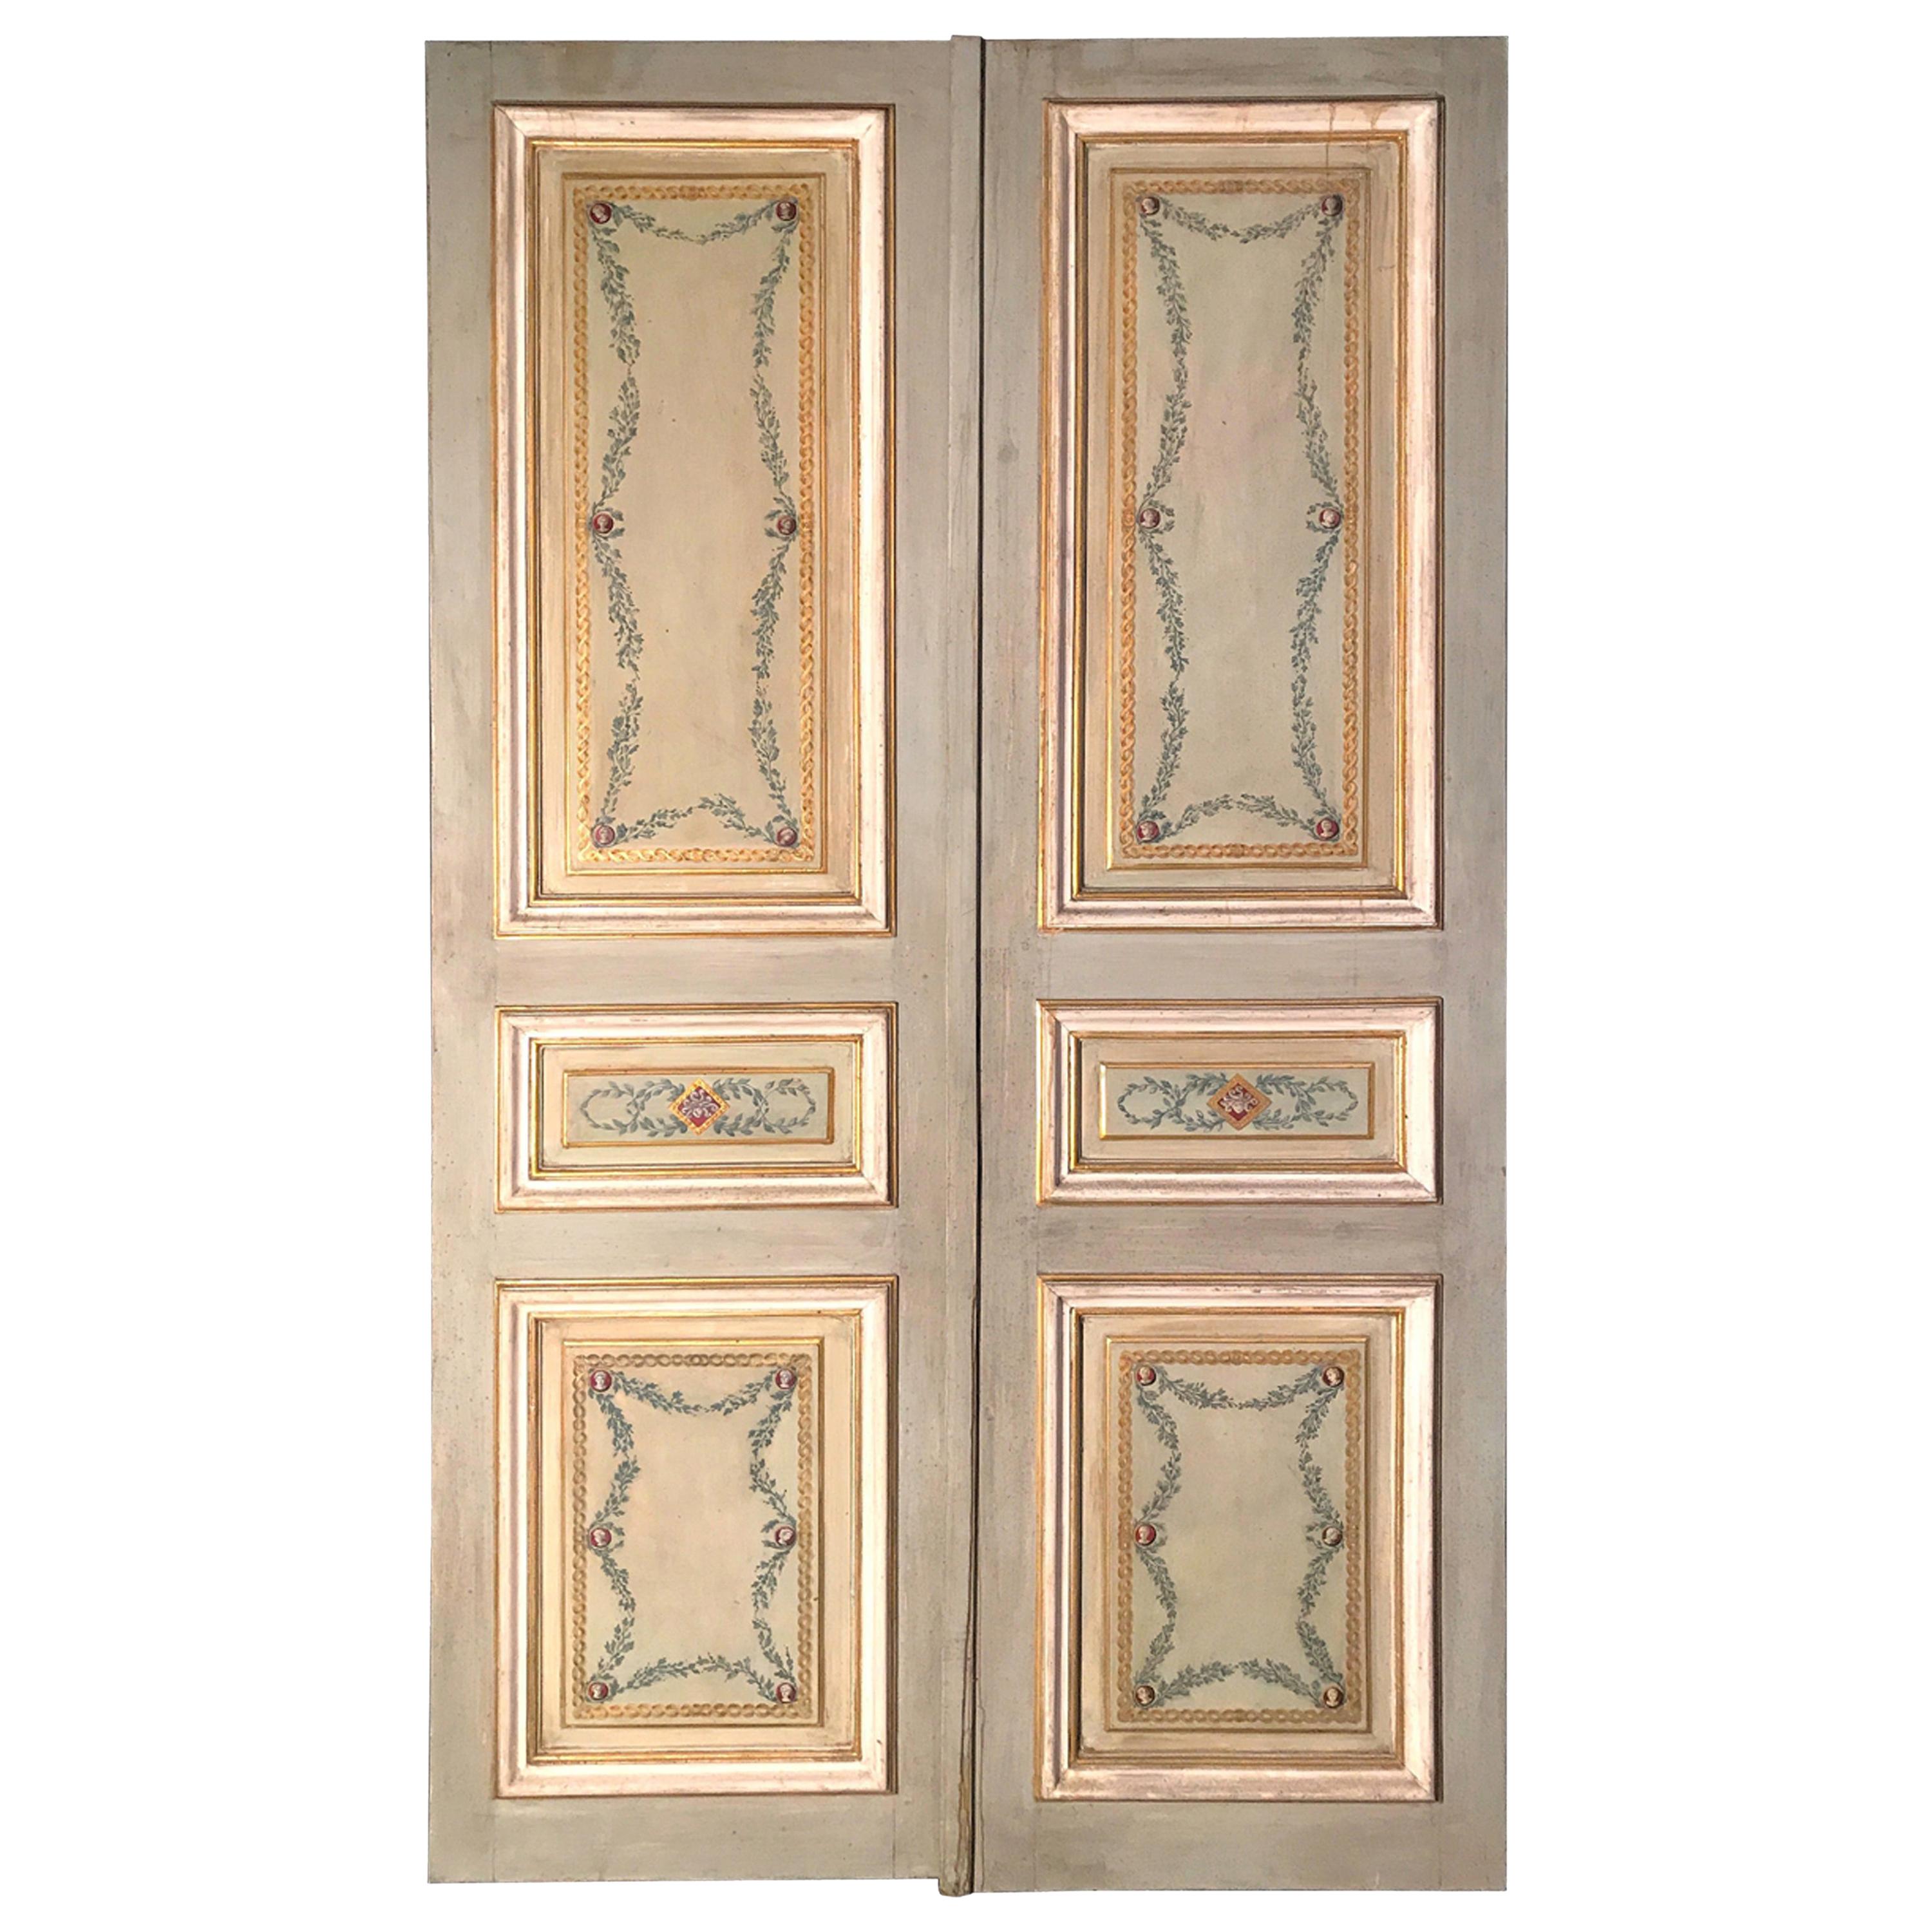 Magnificent 19th Century Italian Painted Doors or Panelling 8